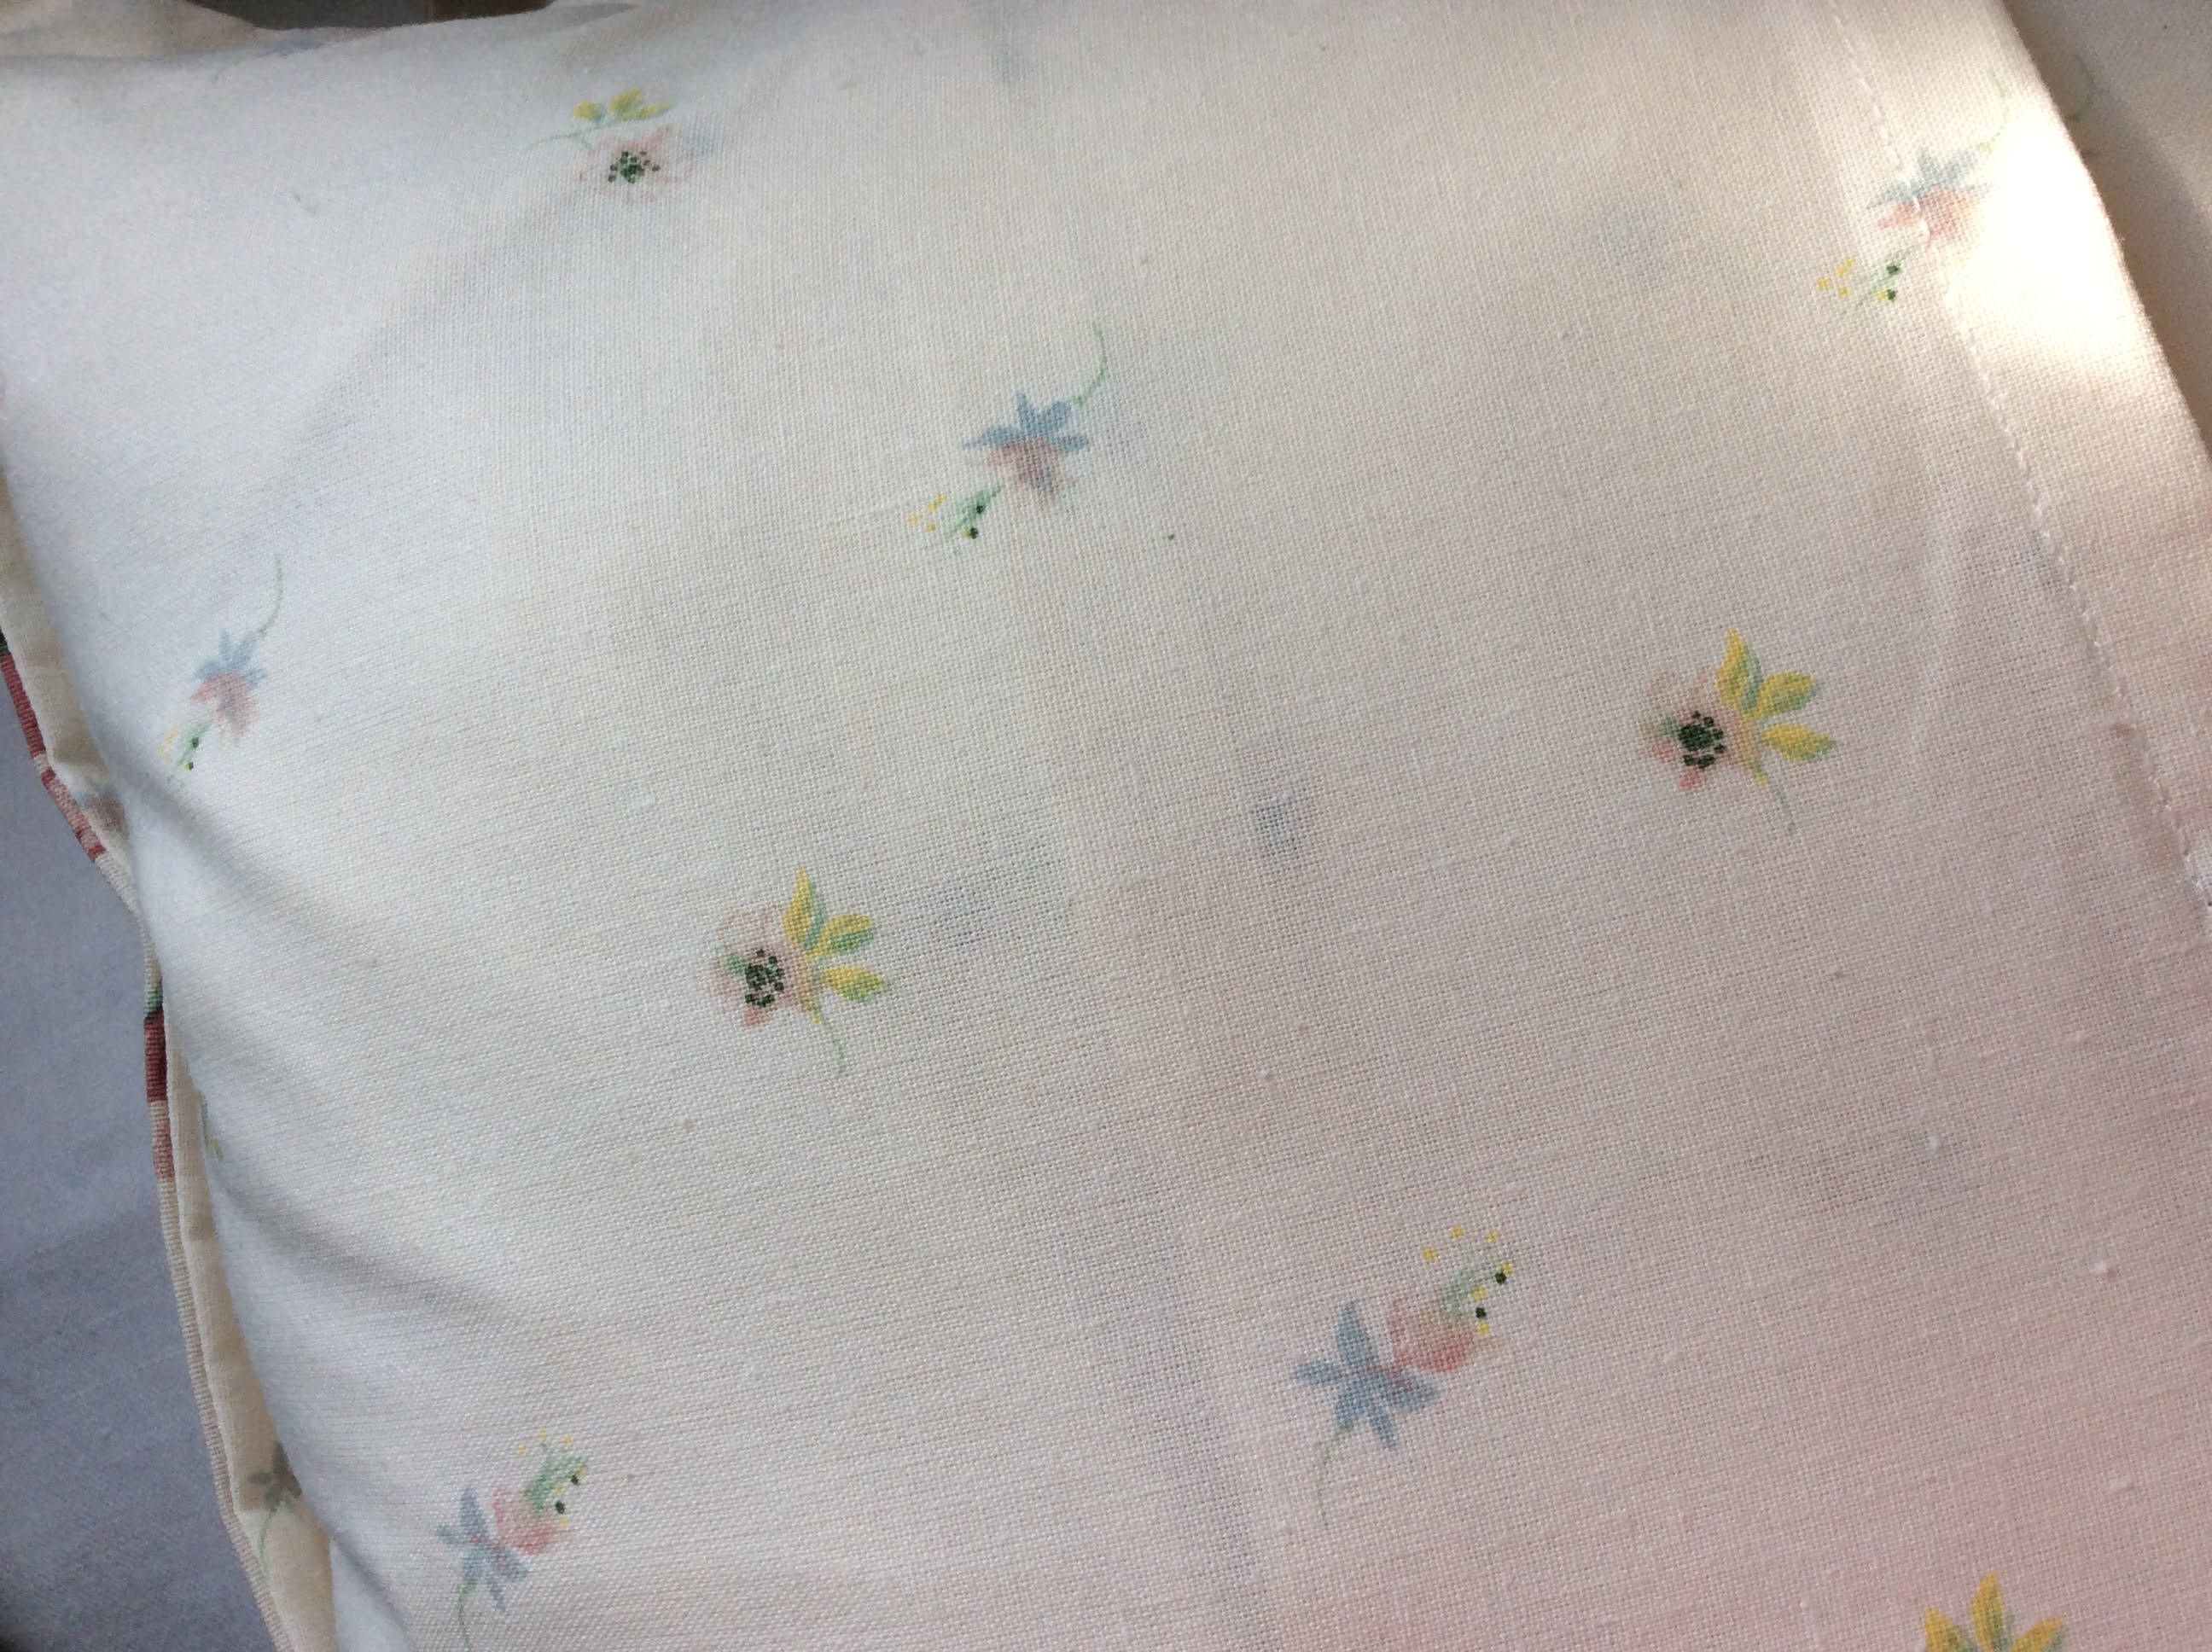 Cushions - dusty pink flowers